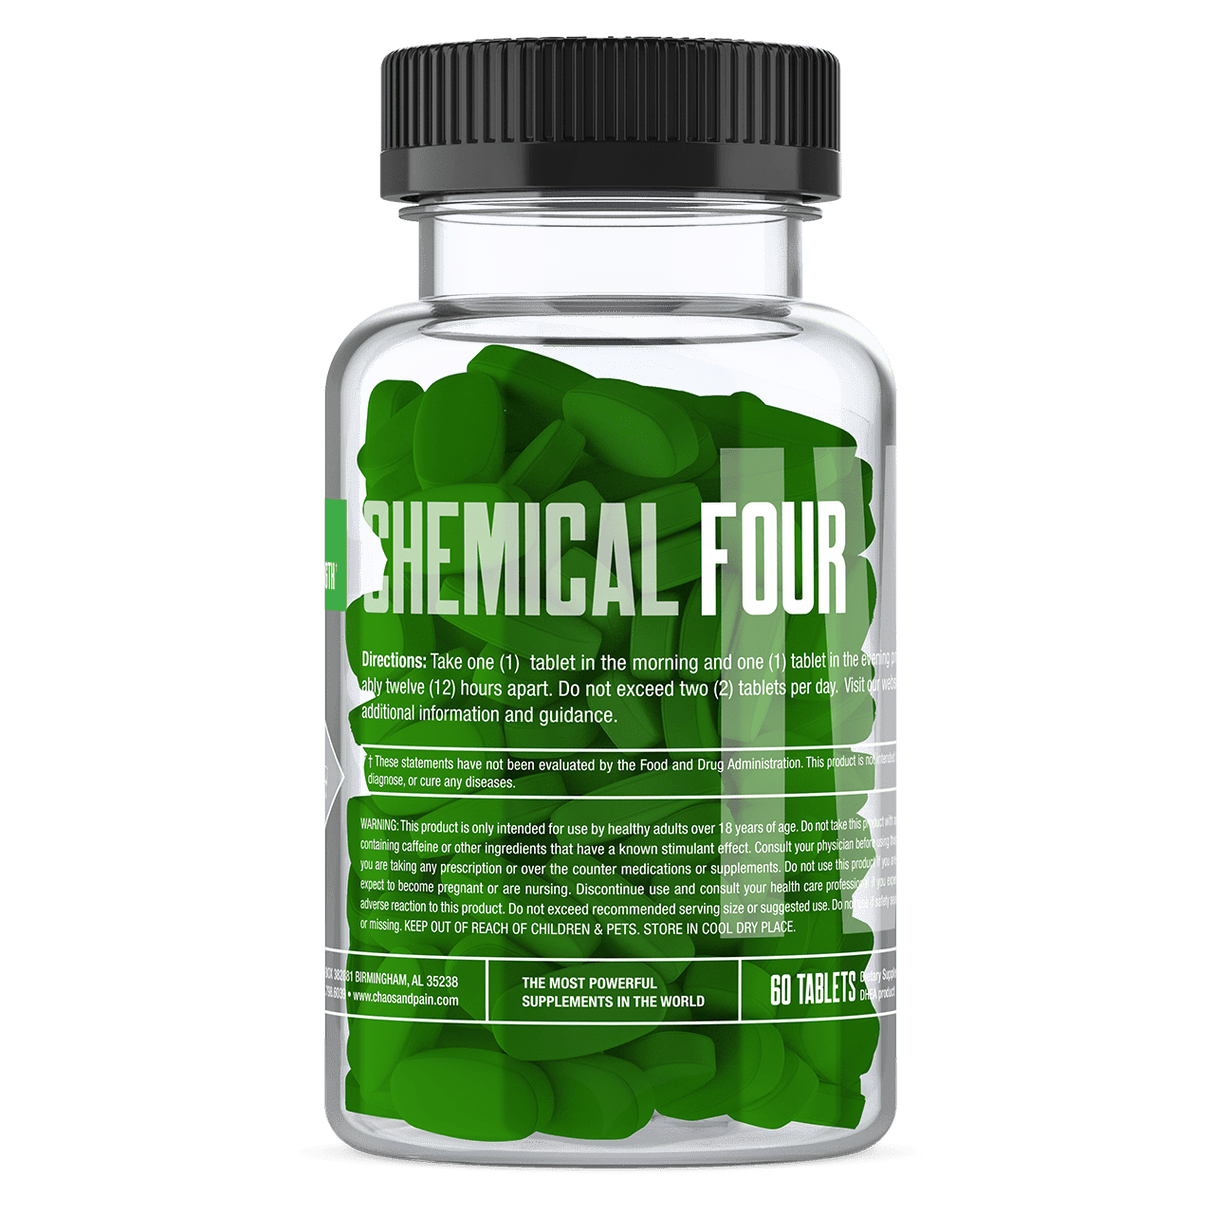 Chemical Four - Mass Accelerator - Muscle Factory, LLC